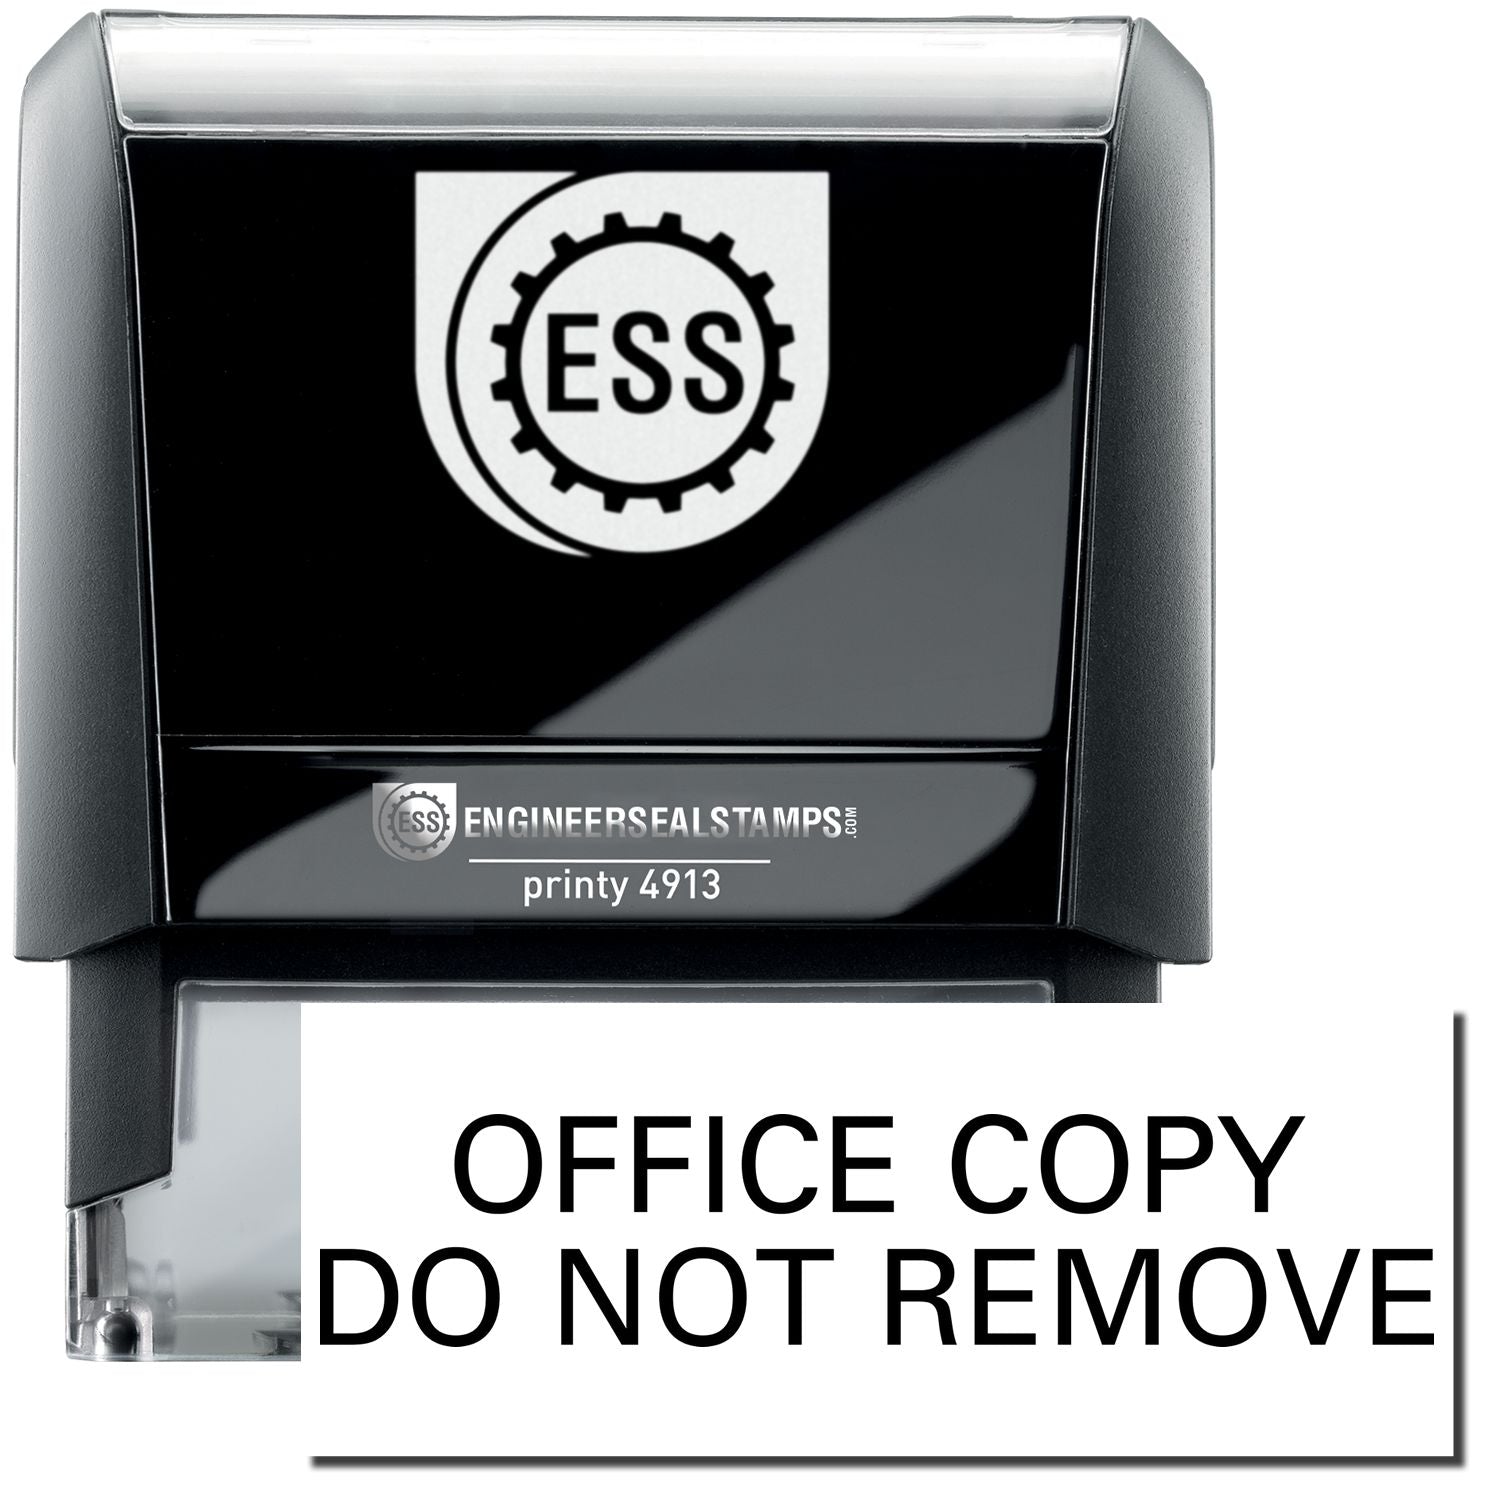 A self-inking stamp with a stamped image showing how the text "OFFICE COPY DO NOT REMOVE" in a large font is displayed by it after stamping.